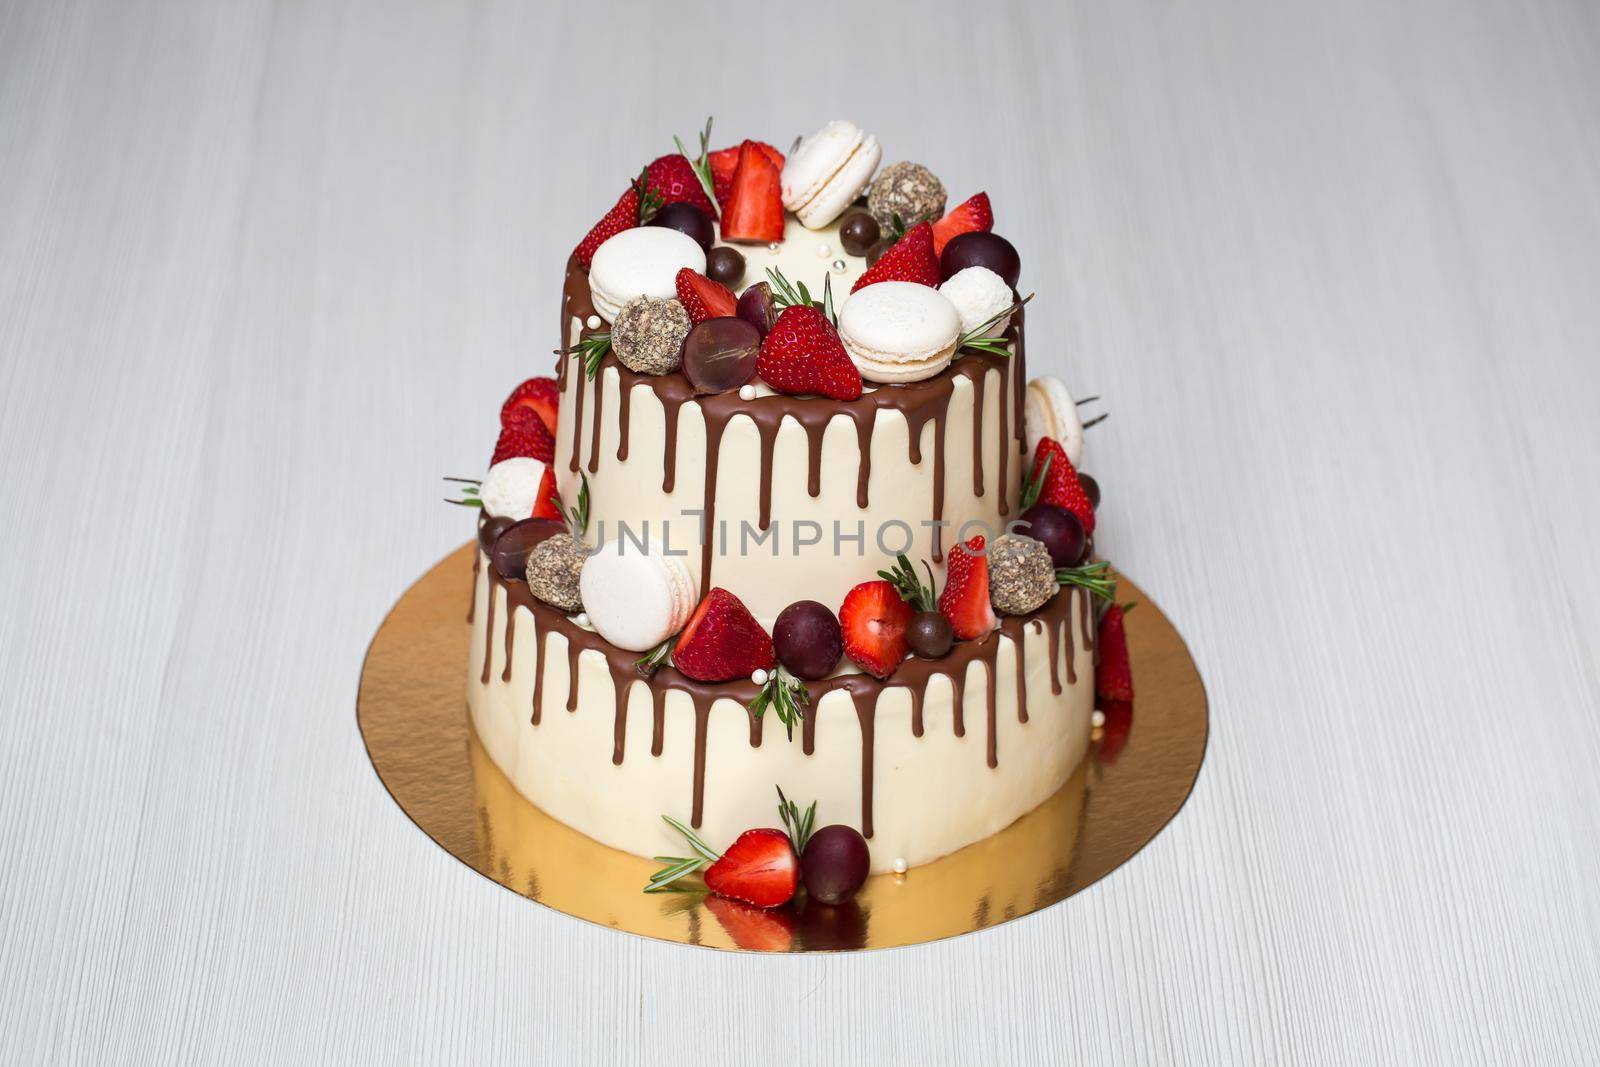 A bright cake with strawberries and chocolate streaks by StudioPeace